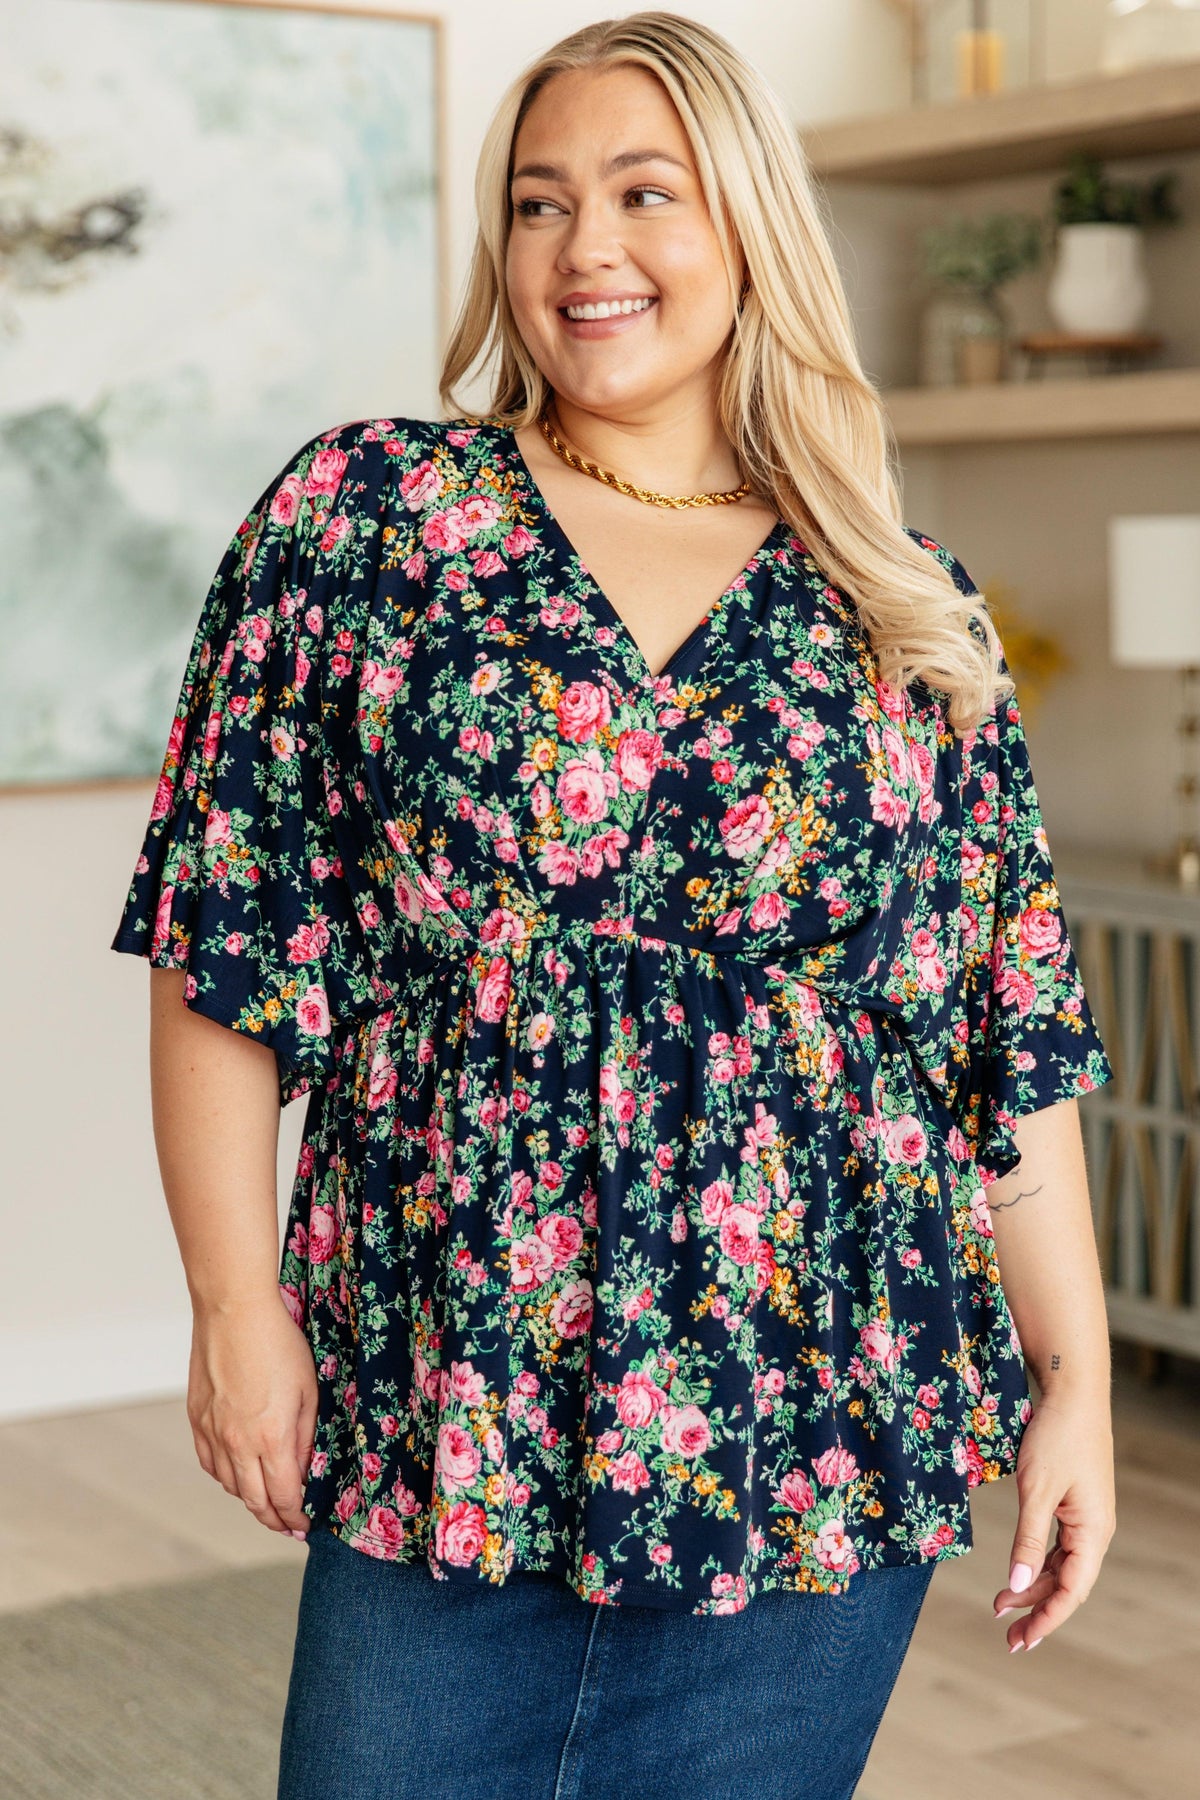 Dreamer Top in Navy and Pink Vintage Bouquet - becauseofadi